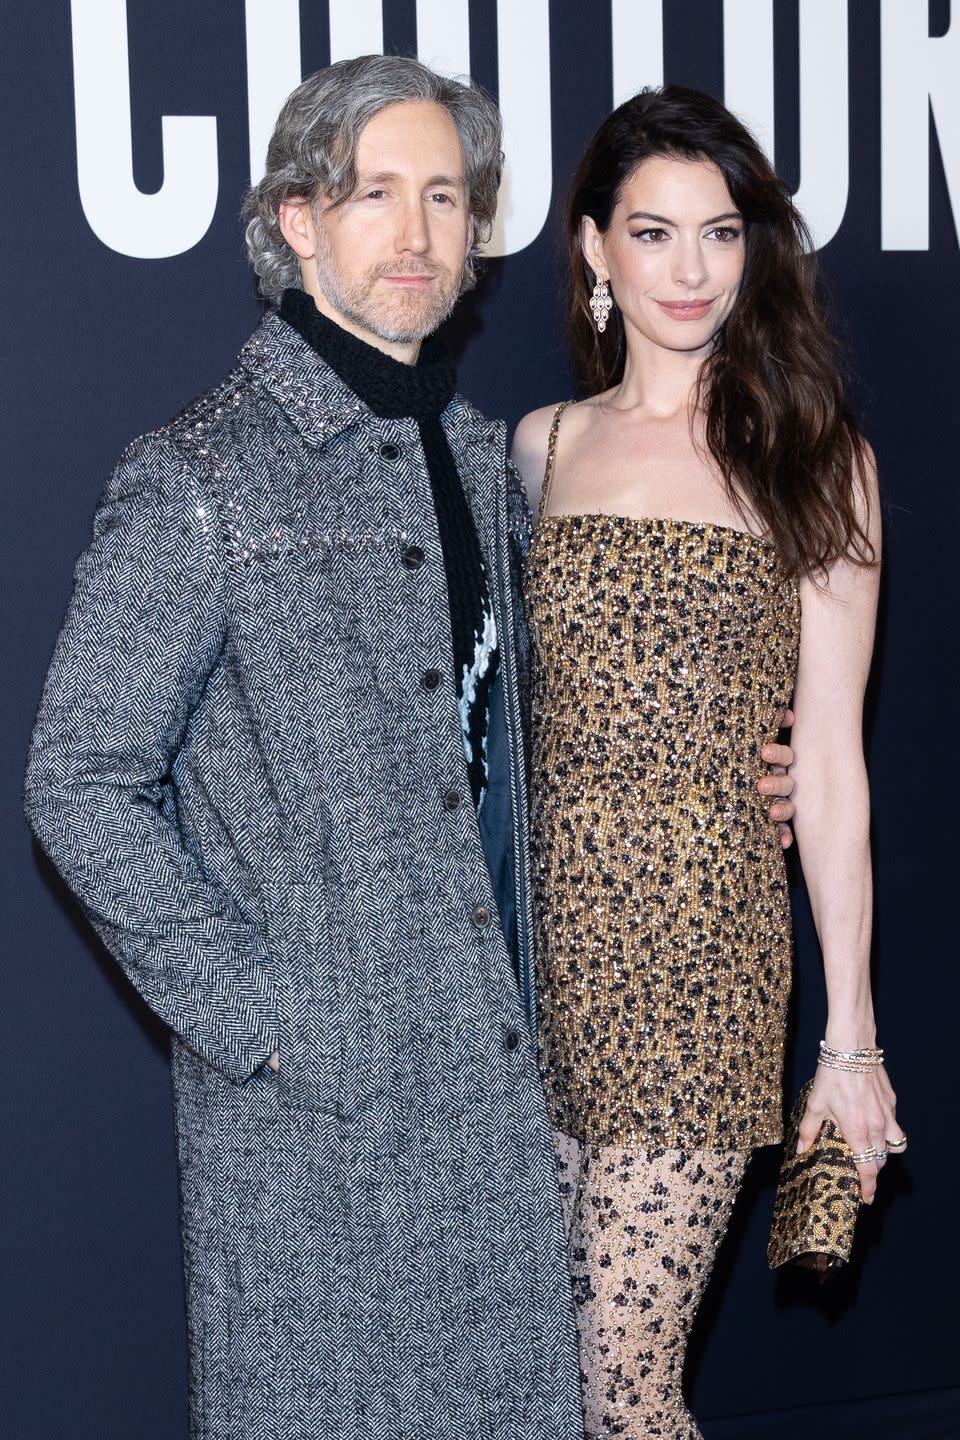 paris, france january 25 editorial use only for non editorial use please seek approval from fashion house l r adam shulman and anne hathaway attend the valentino haute couture spring summer 2023 show as part of paris fashion week on january 25, 2023 in paris, france photo by marc piaseckiwireimage